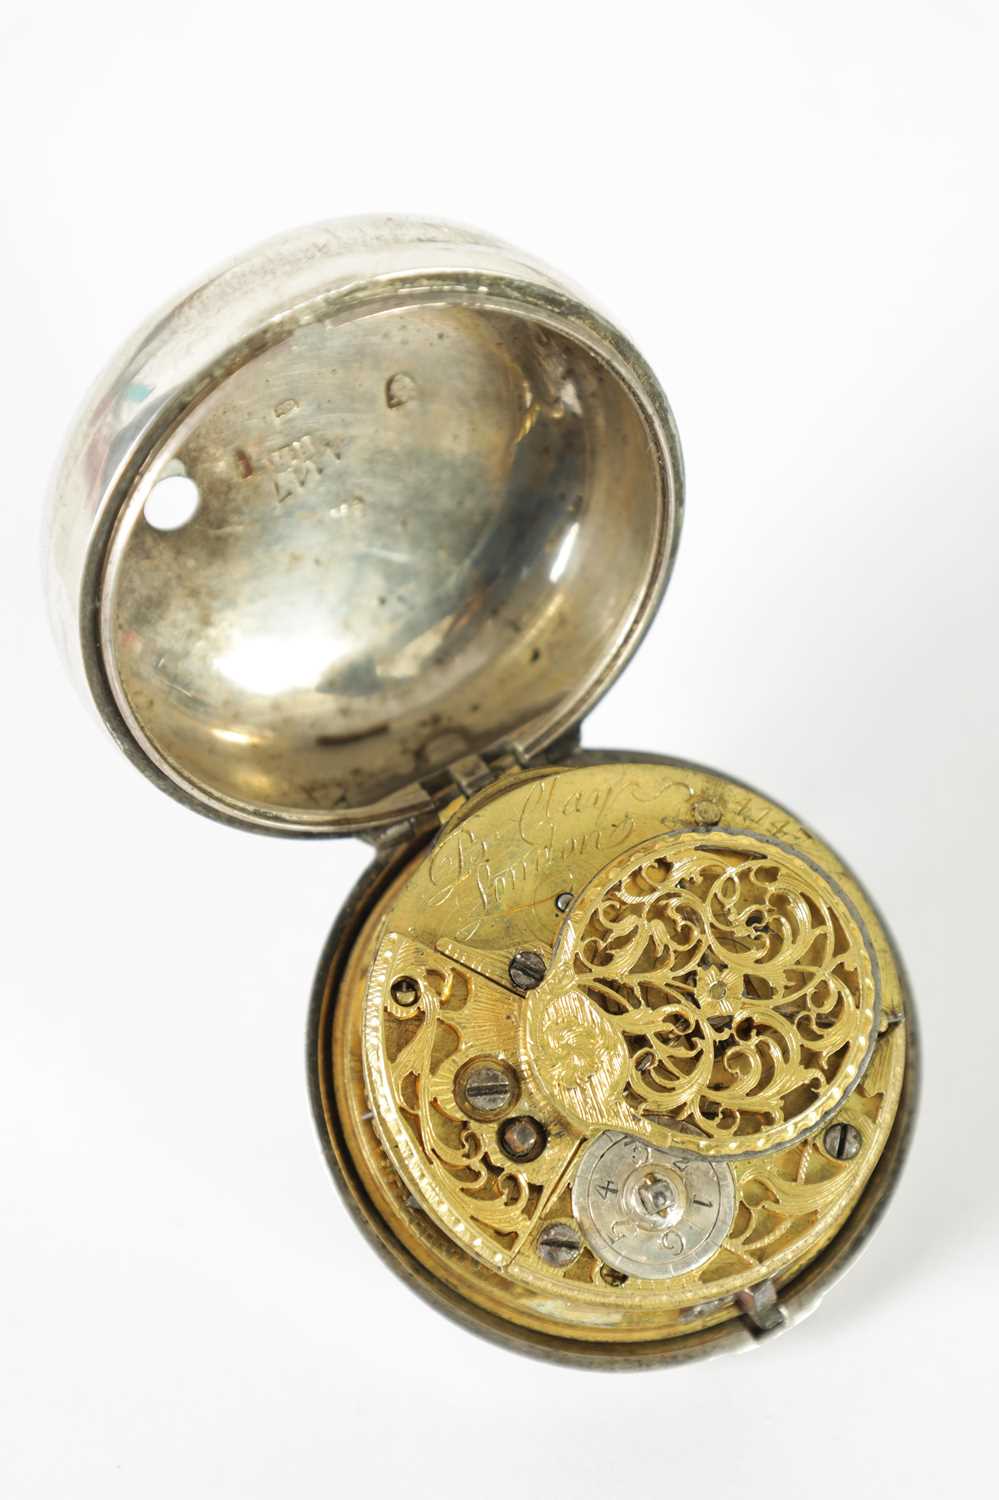 B. CLAY, LONDON. AN EARLY 18TH CENTURY SILVER PAIR CASE VERGE POCKET WATCH - Image 5 of 10